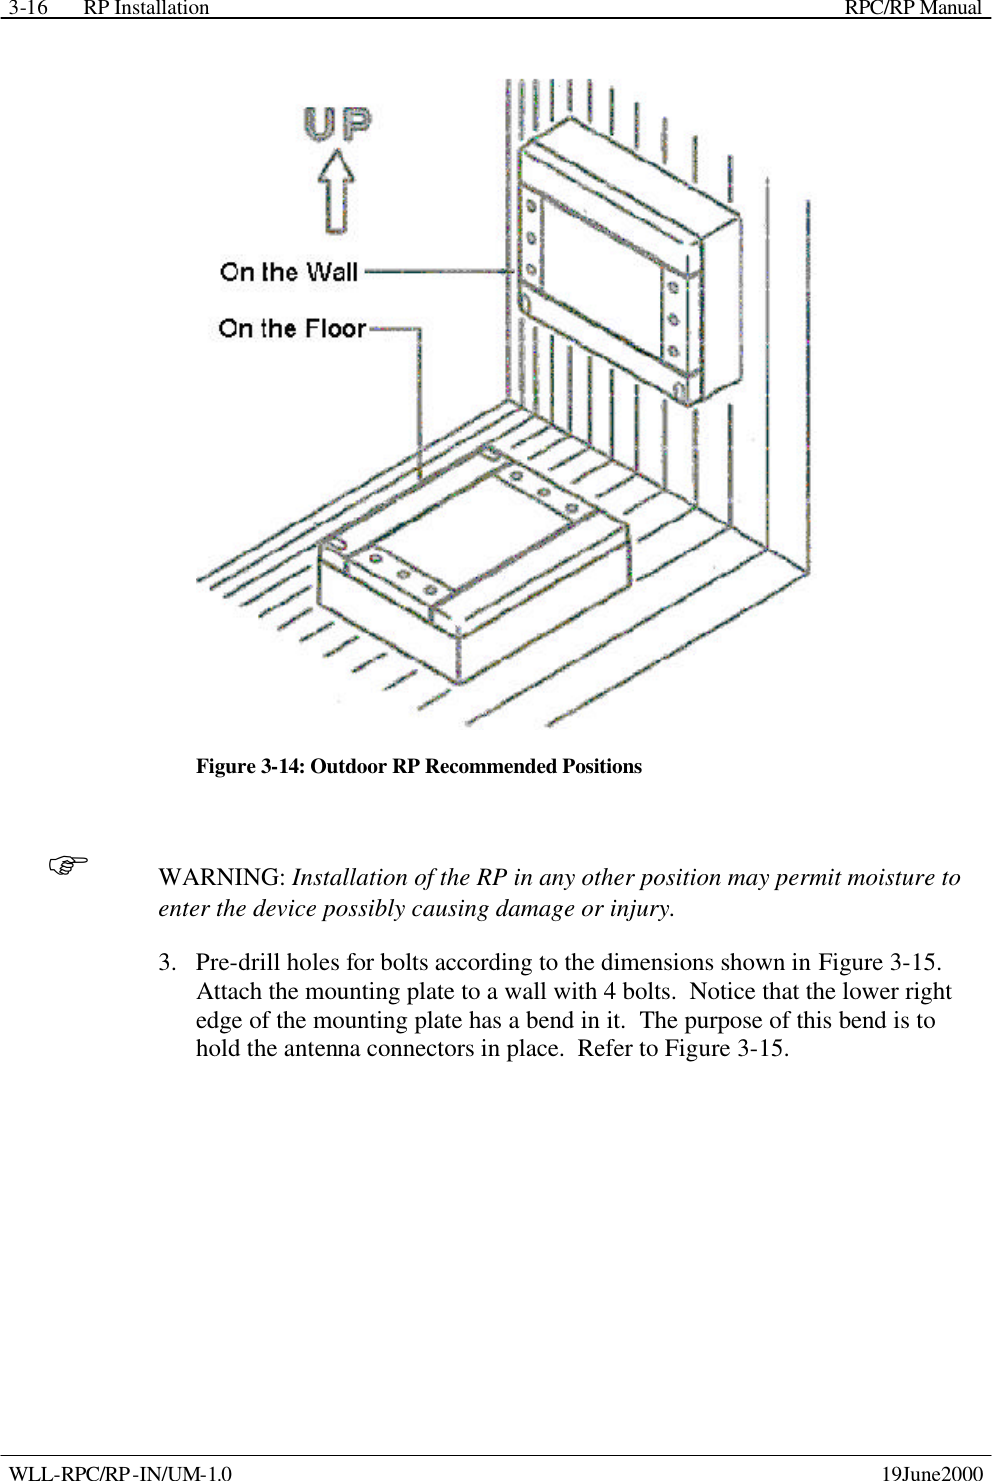 RP Installation    RPC/RP Manual WLL-RPC/RP-IN/UM-1.0    19June2000 3-16 Figure 3-14: Outdoor RP Recommended Positions F WARNING: Installation of the RP in any other position may permit moisture to enter the device possibly causing damage or injury. 3.  Pre-drill holes for bolts according to the dimensions shown in Figure 3-15.  Attach the mounting plate to a wall with 4 bolts.  Notice that the lower right edge of the mounting plate has a bend in it.  The purpose of this bend is to hold the antenna connectors in place.  Refer to Figure 3-15. 